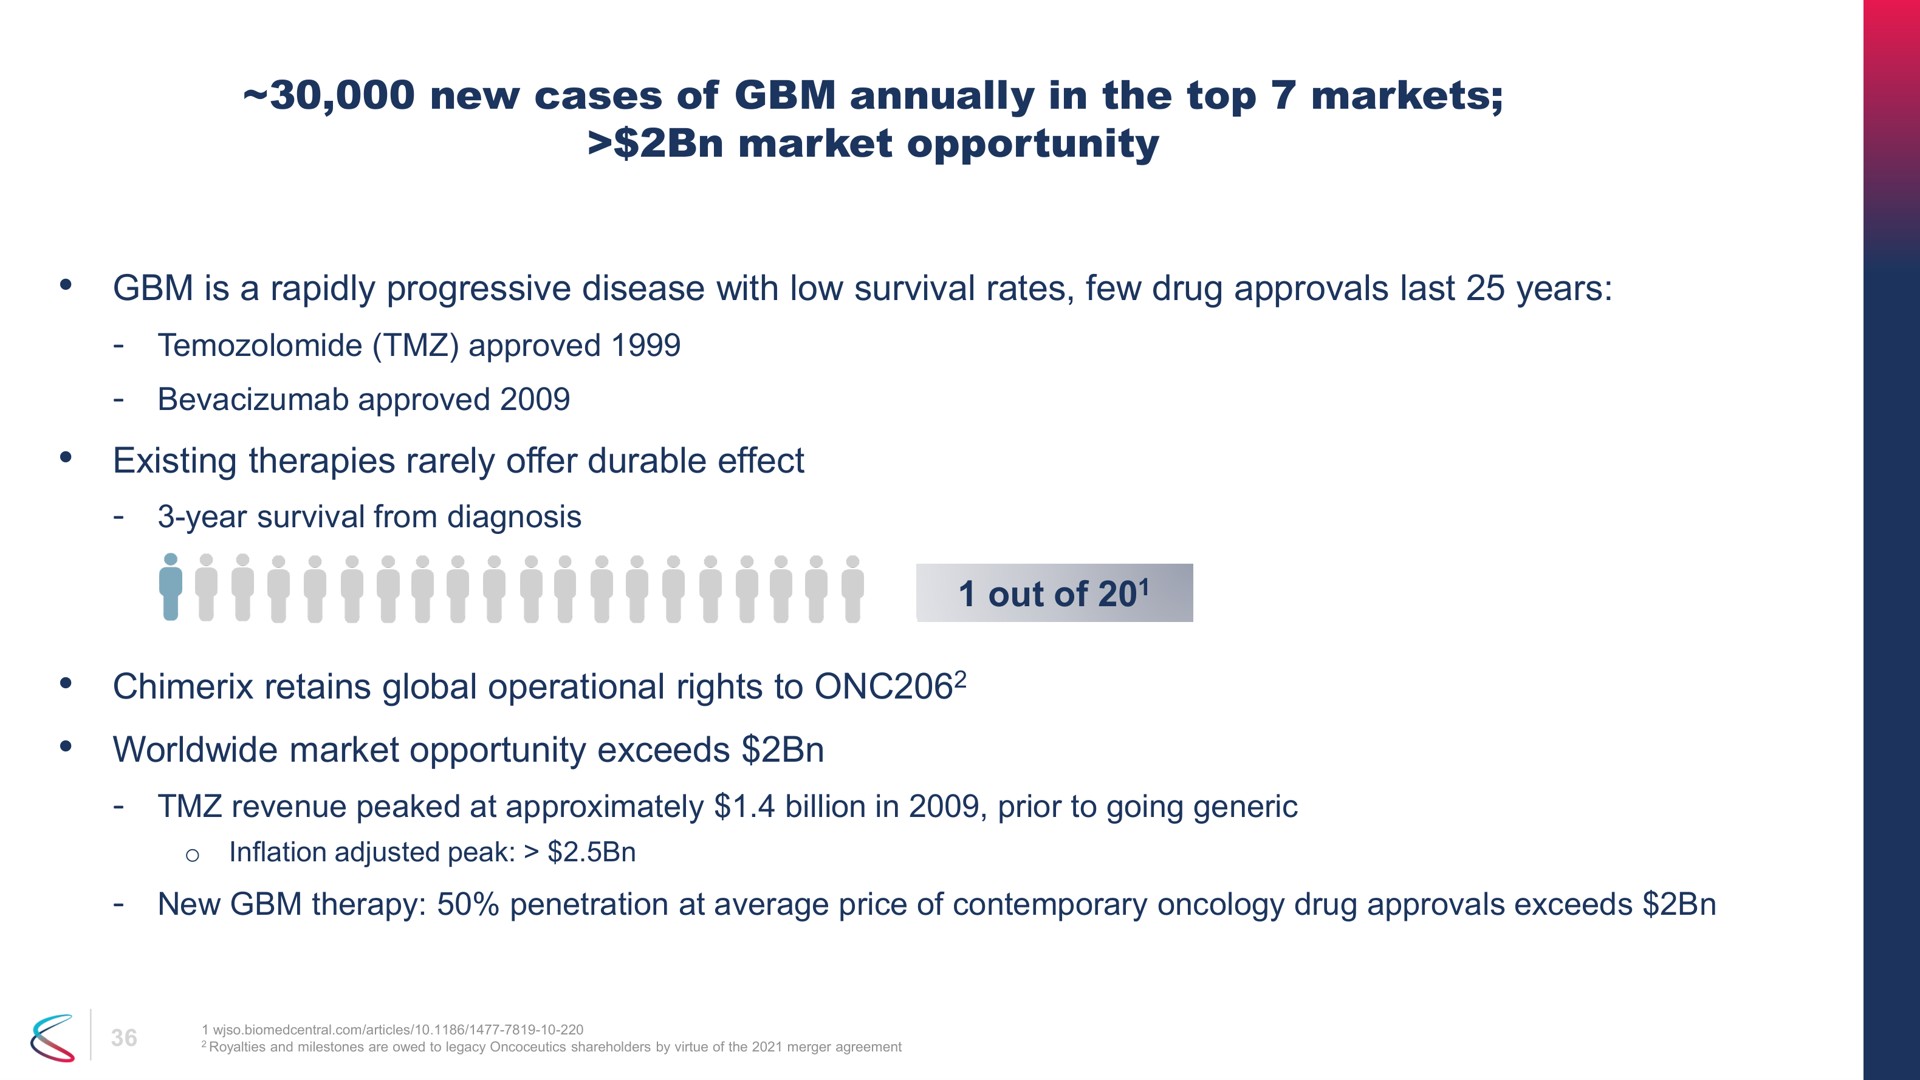 new cases of annually in the top markets market opportunity is a rapidly progressive disease with low survival rates few drug approvals last years existing therapies rarely offer durable effect retains global operational rights to market opportunity exceeds out of | Chimerix